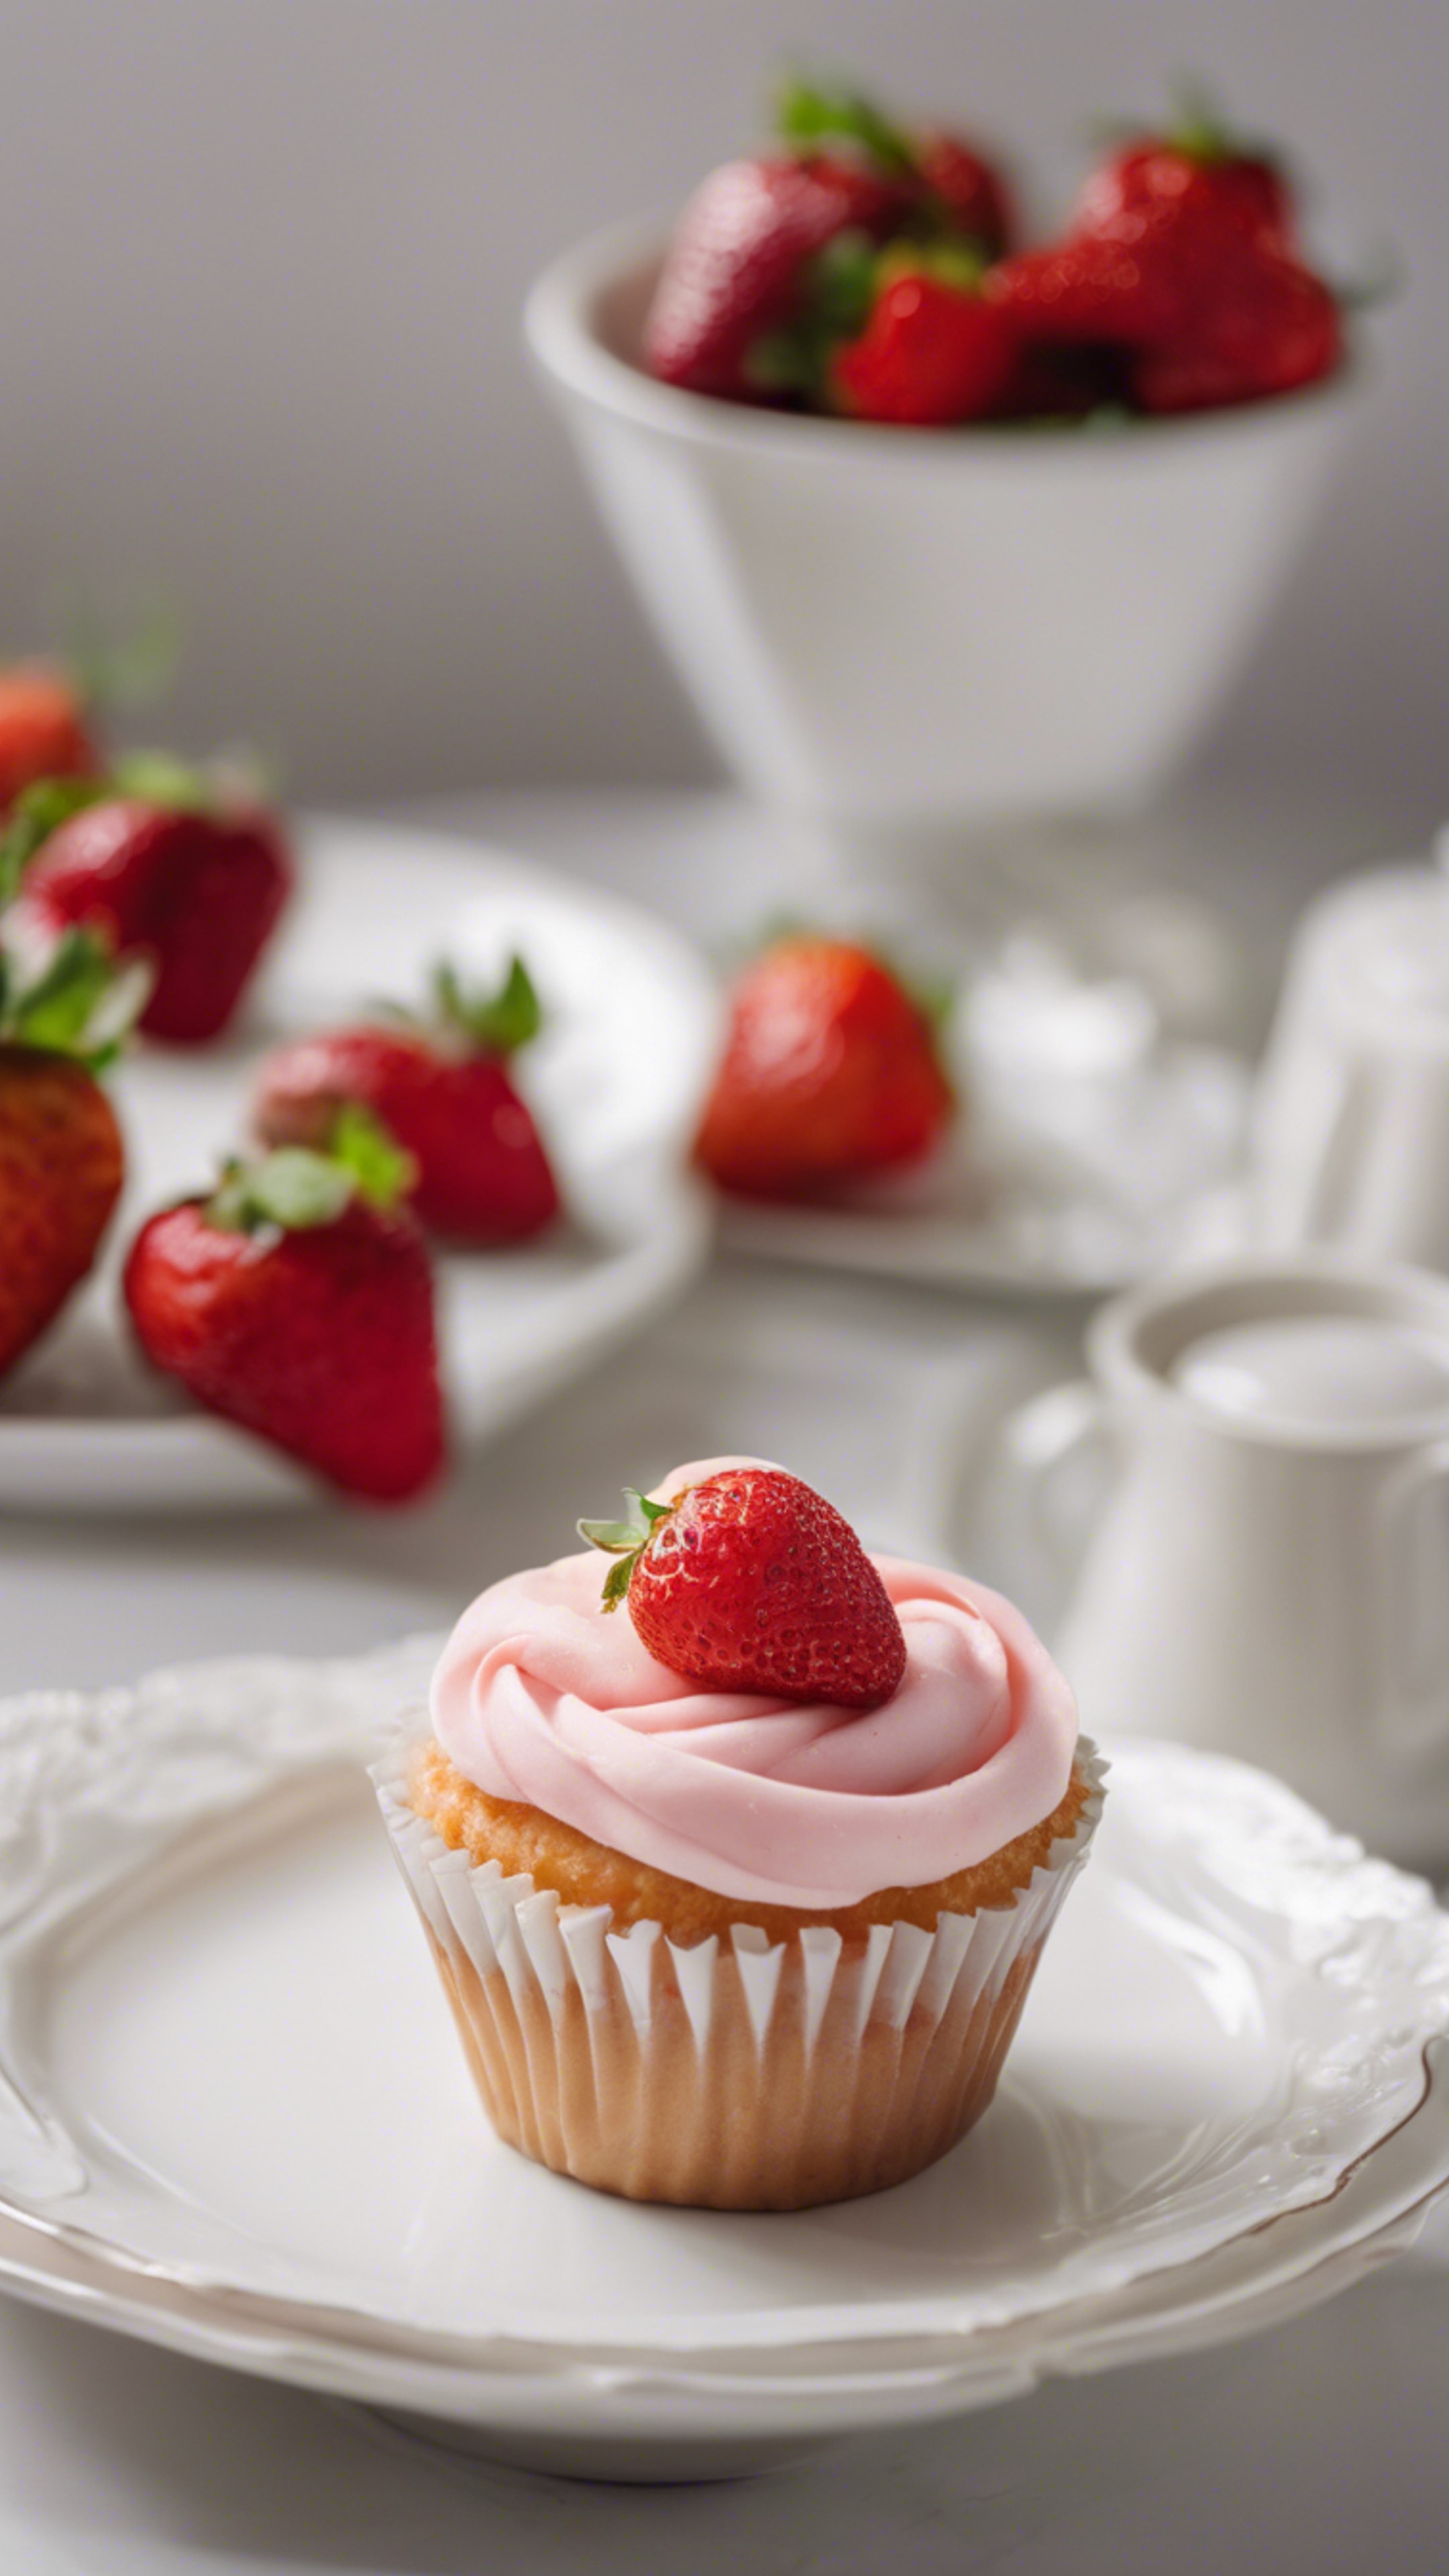 A single strawberry cupcake on a white porcelain plate in bright daylight. Tapeta[ddcb3576222e4604b5c8]